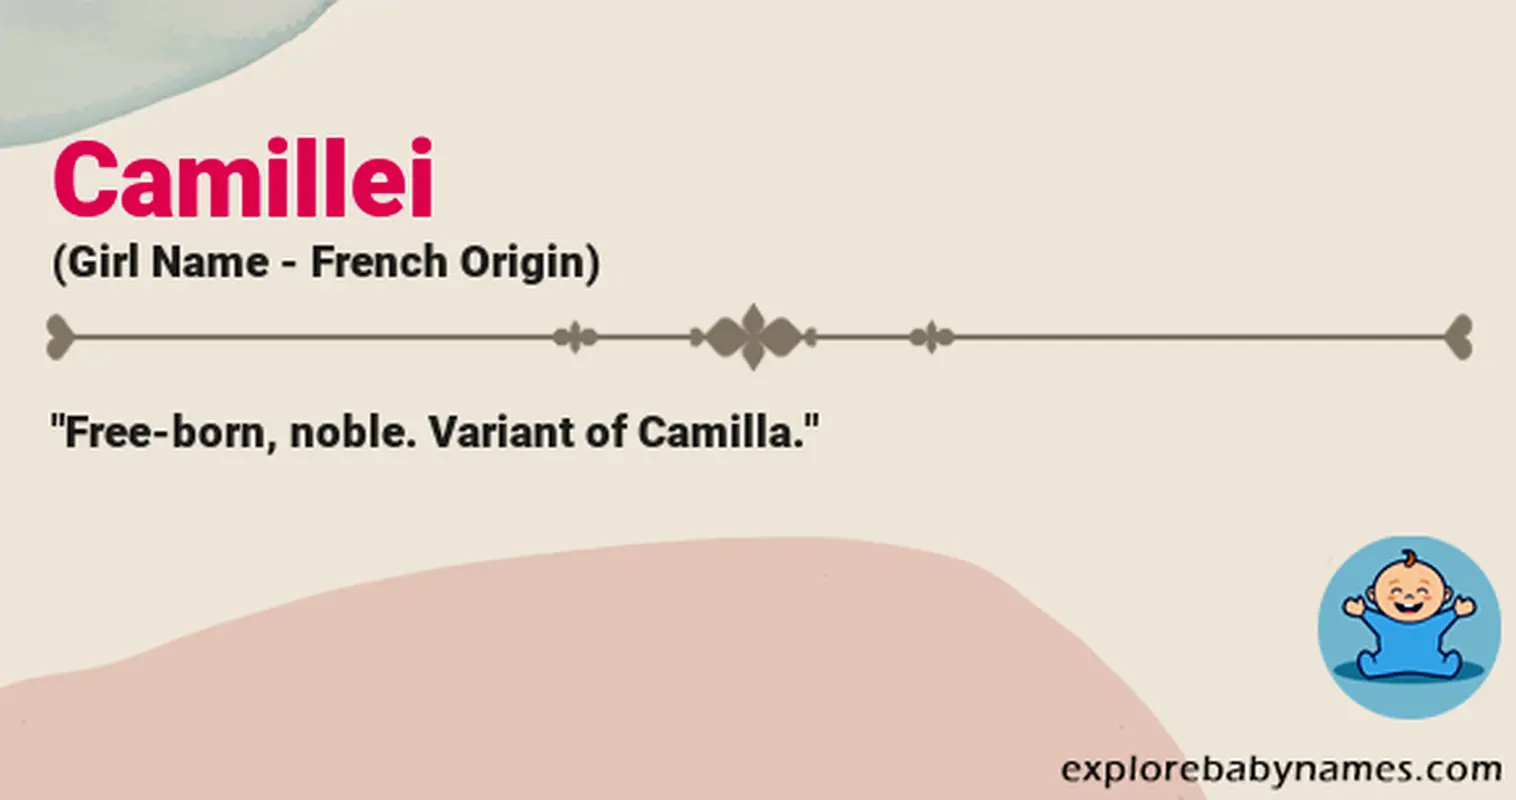 Meaning of Camillei